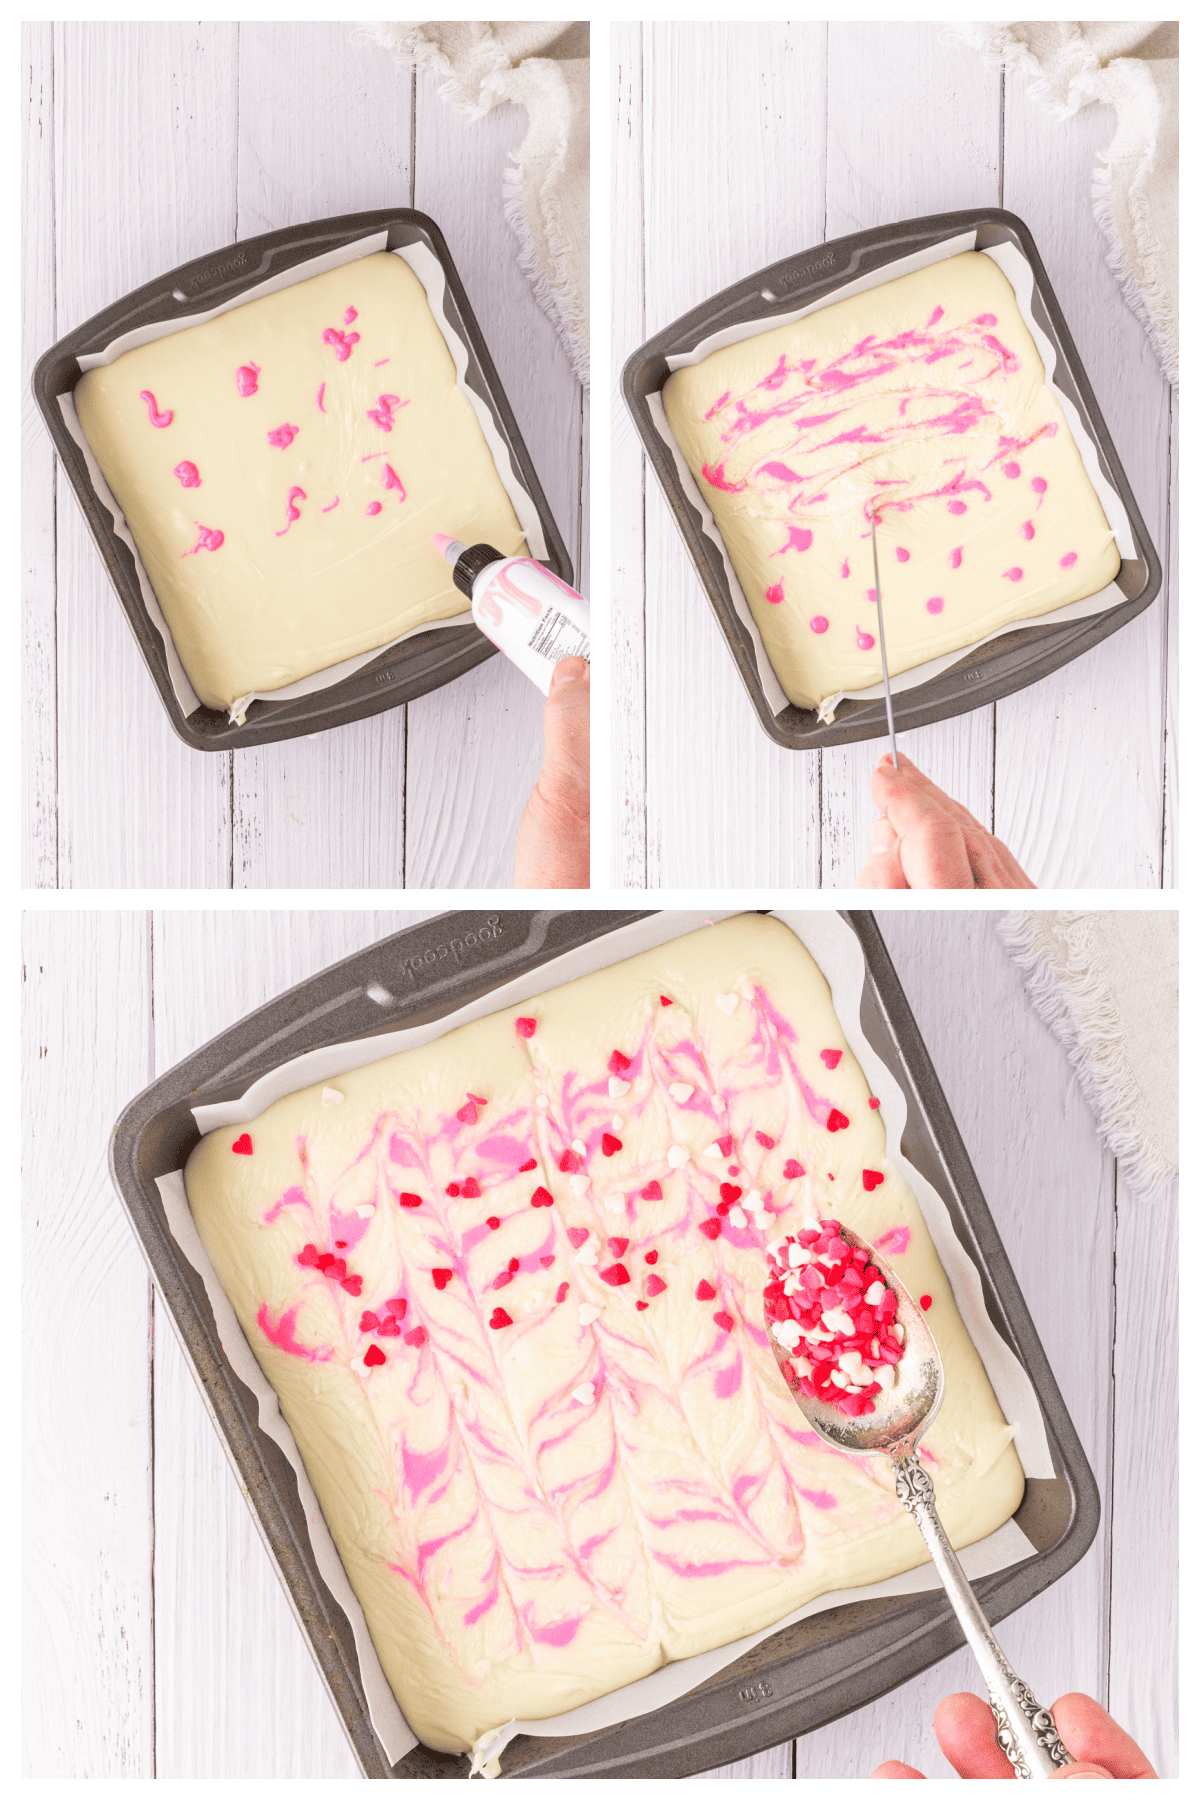 Collage showing how to decorate white chocolate fudge for Valentine's Day.